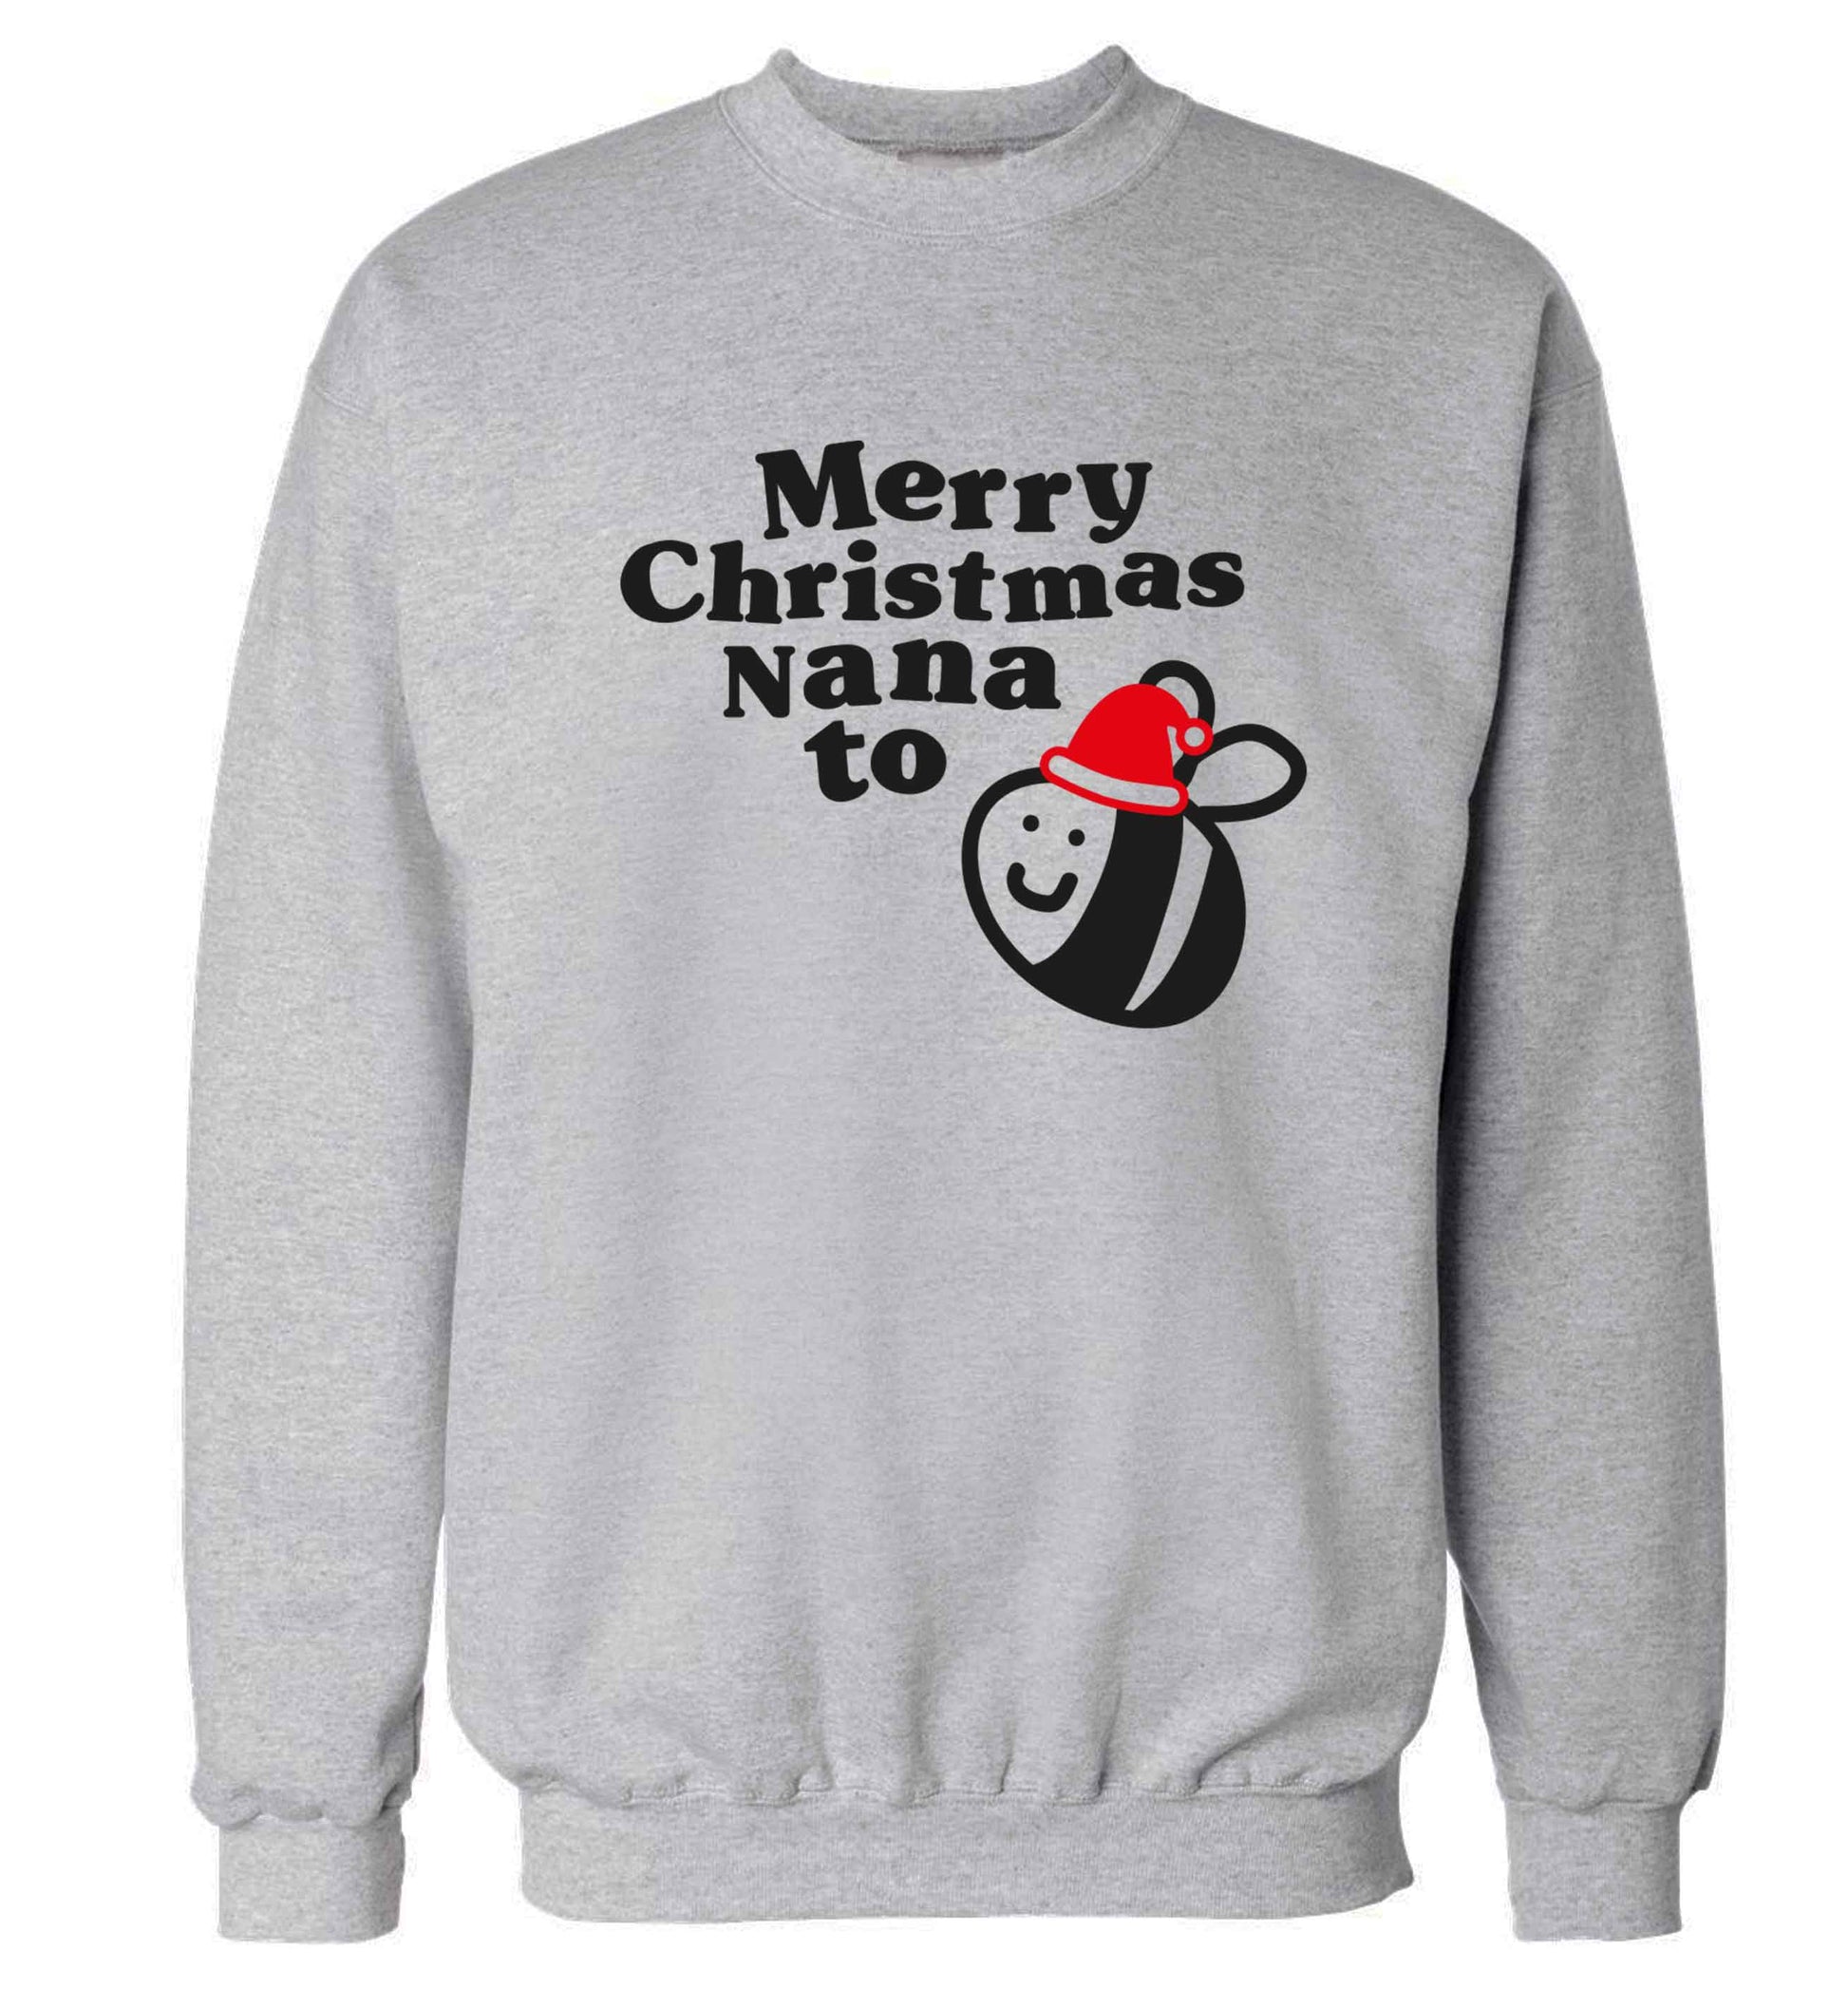 Merry Christmas nana to be Adult's unisex grey Sweater 2XL